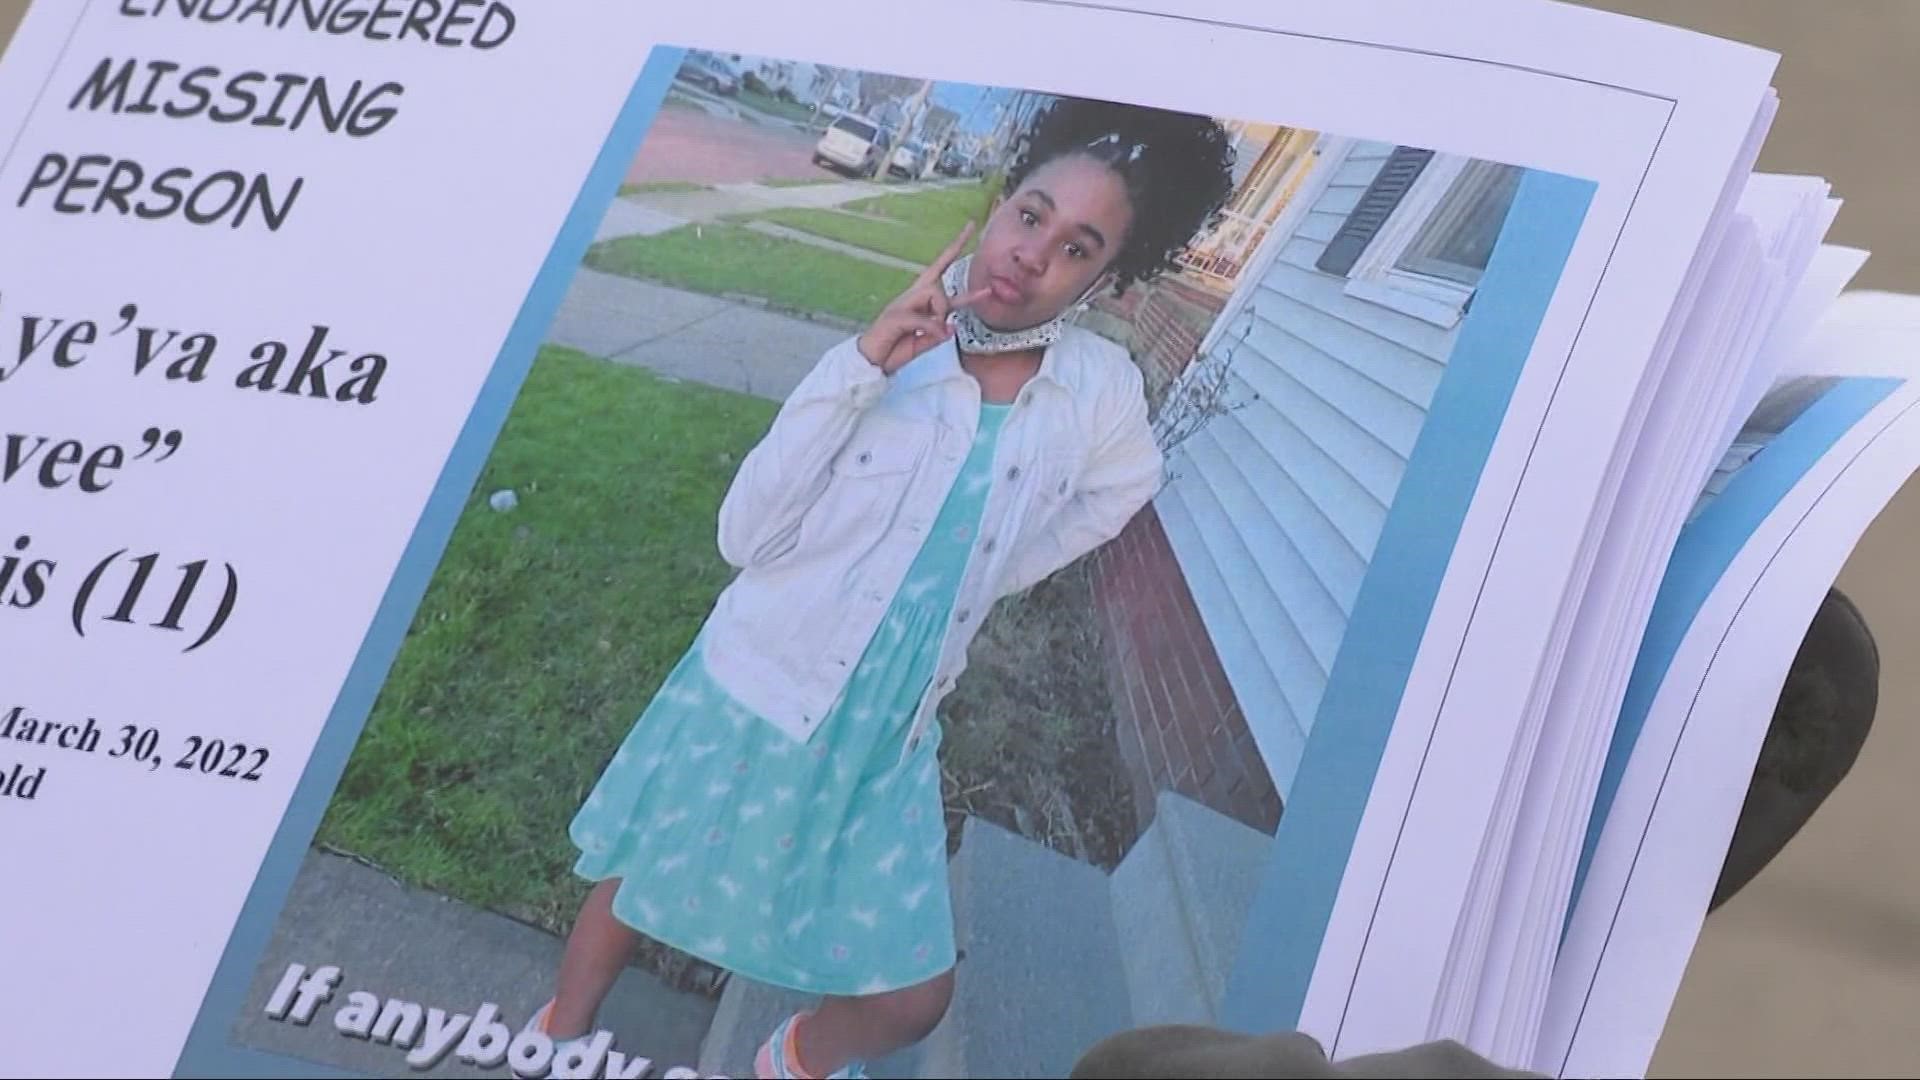 It has been more than 48 hours since 11-year-old Aye'va Lewis has been seen. Search parties are scouring her east side neighborhood searching for answers.